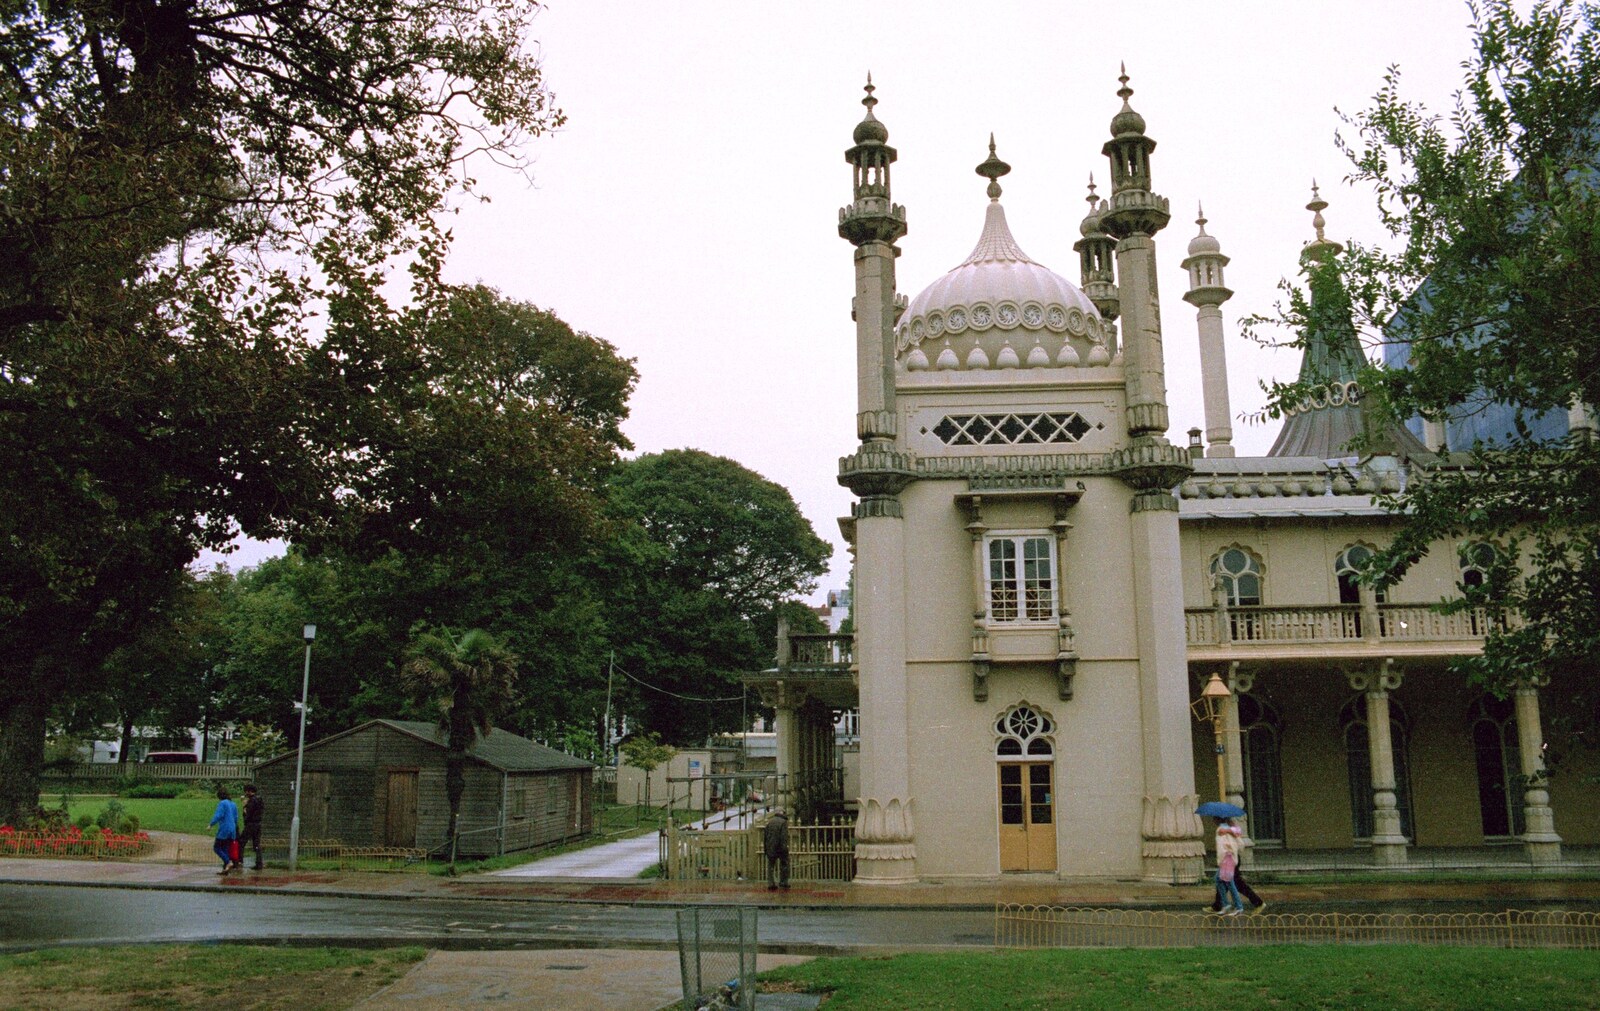 A little bit of Brighton Pavillion from Network Day with Hamish, The South East - 21st June 1986